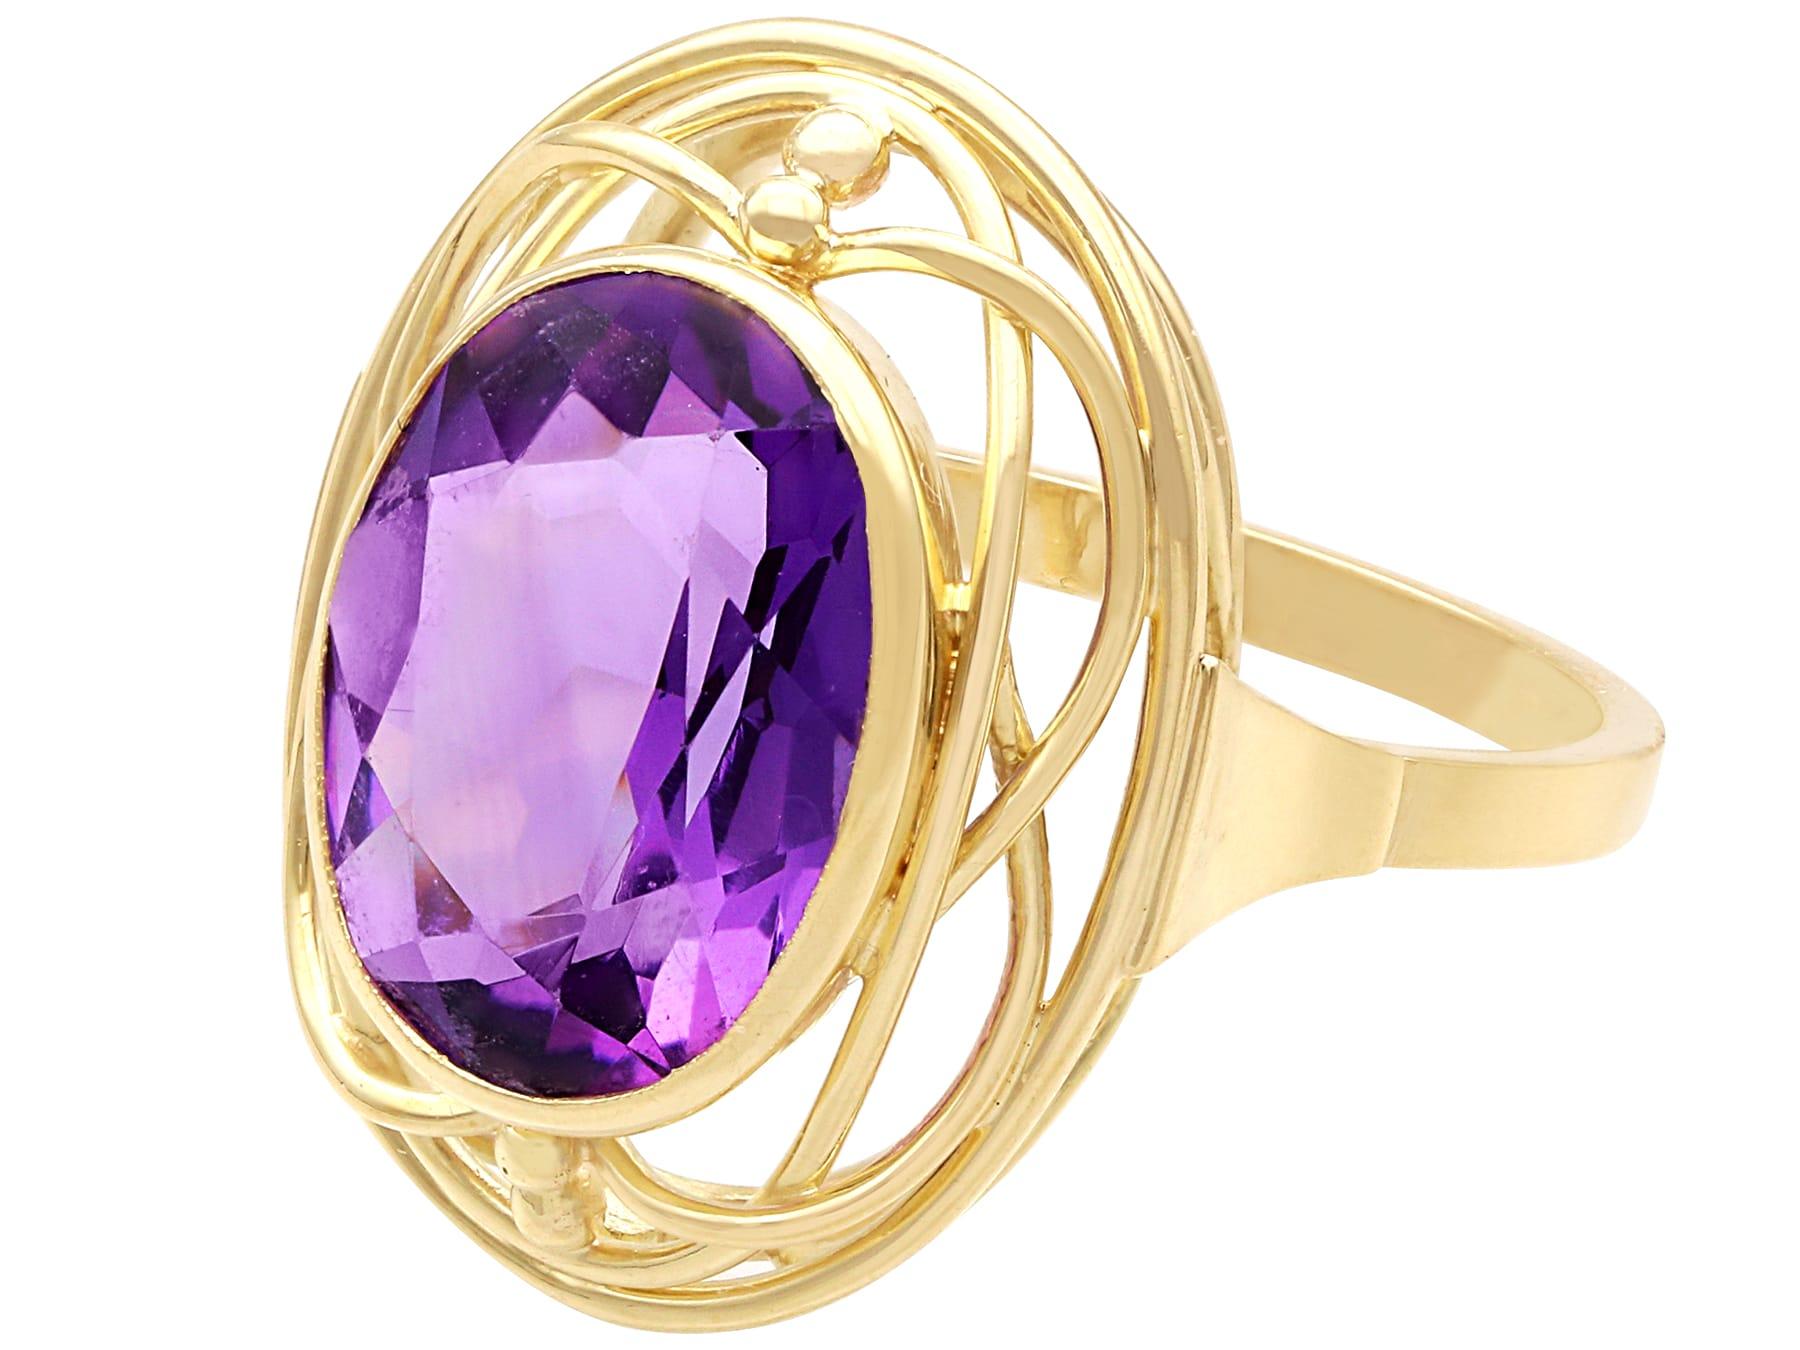 Vintage 6.91Ct Amethyst and 14k Yellow Gold Dress Ring 1940 For Sale 1